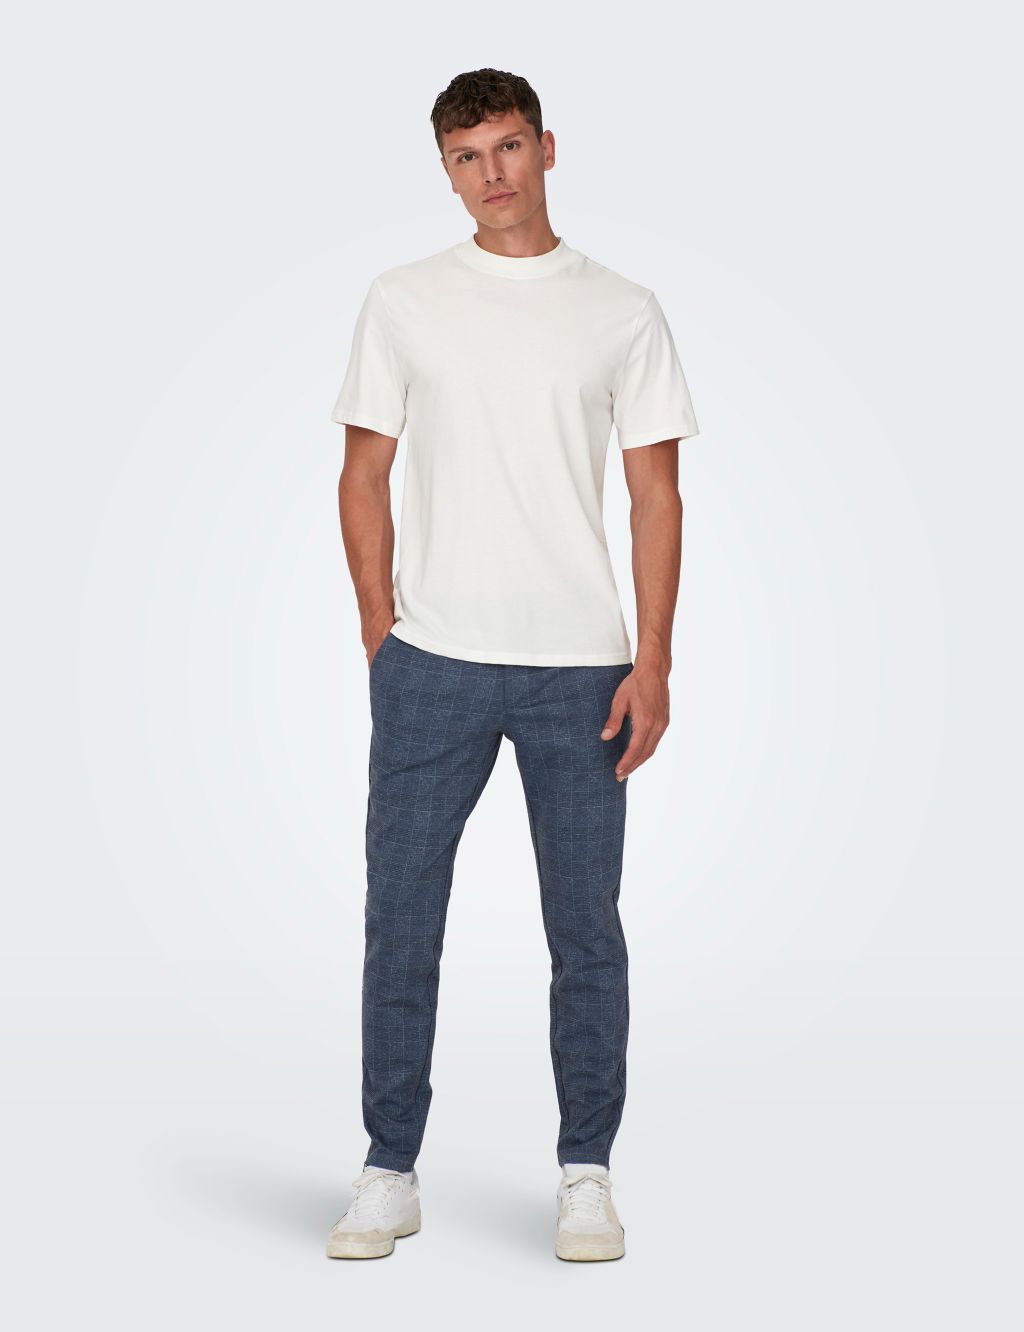 Tapered Fit Checked Trousers image 1